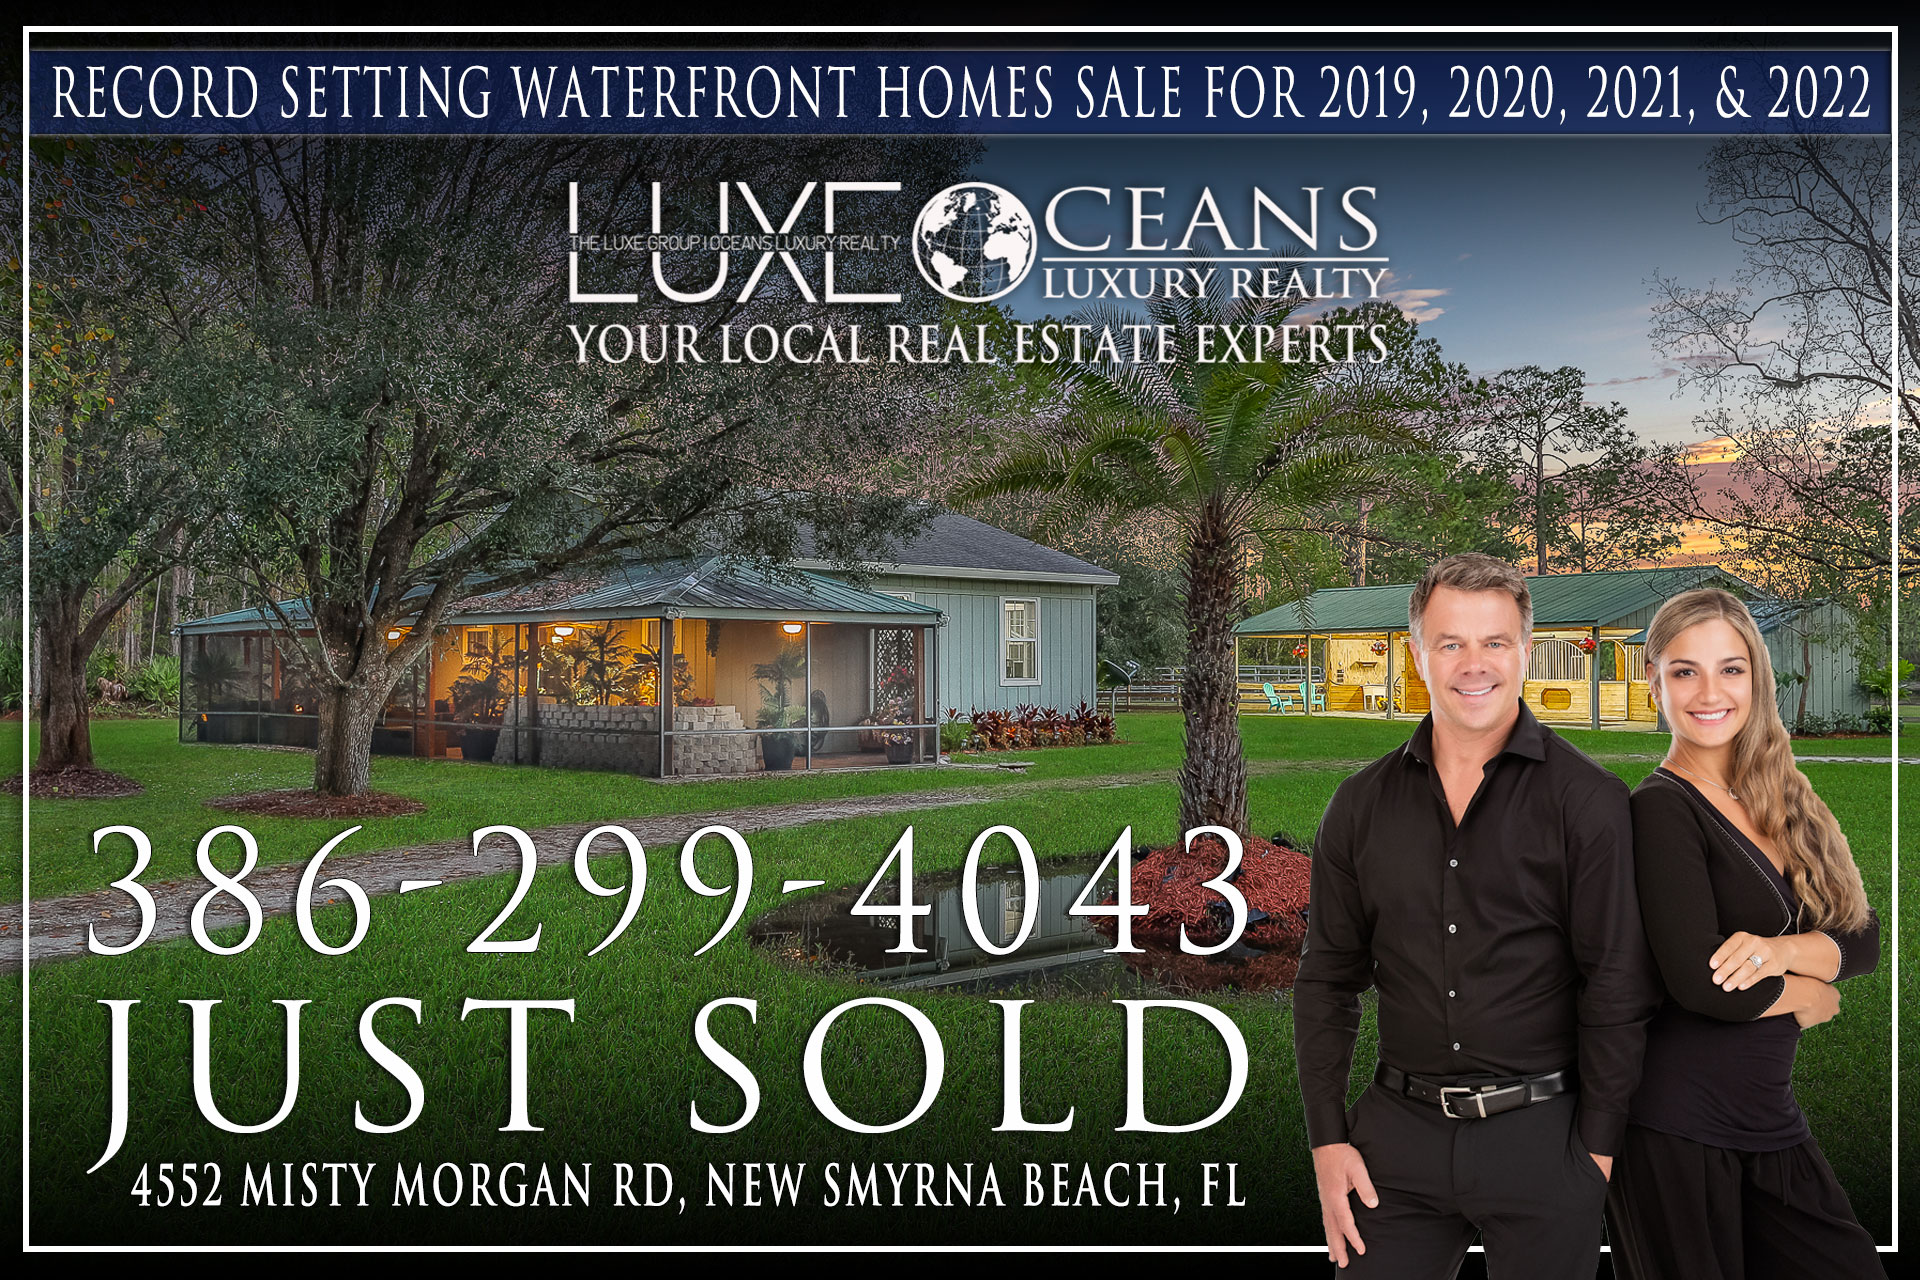 Just Sold 4552 Misty Morgan Road New Smyrna Beach, Florida Real Estate For Sale. The LUXE Group at Oceans Luxury Realty 386-299-4043